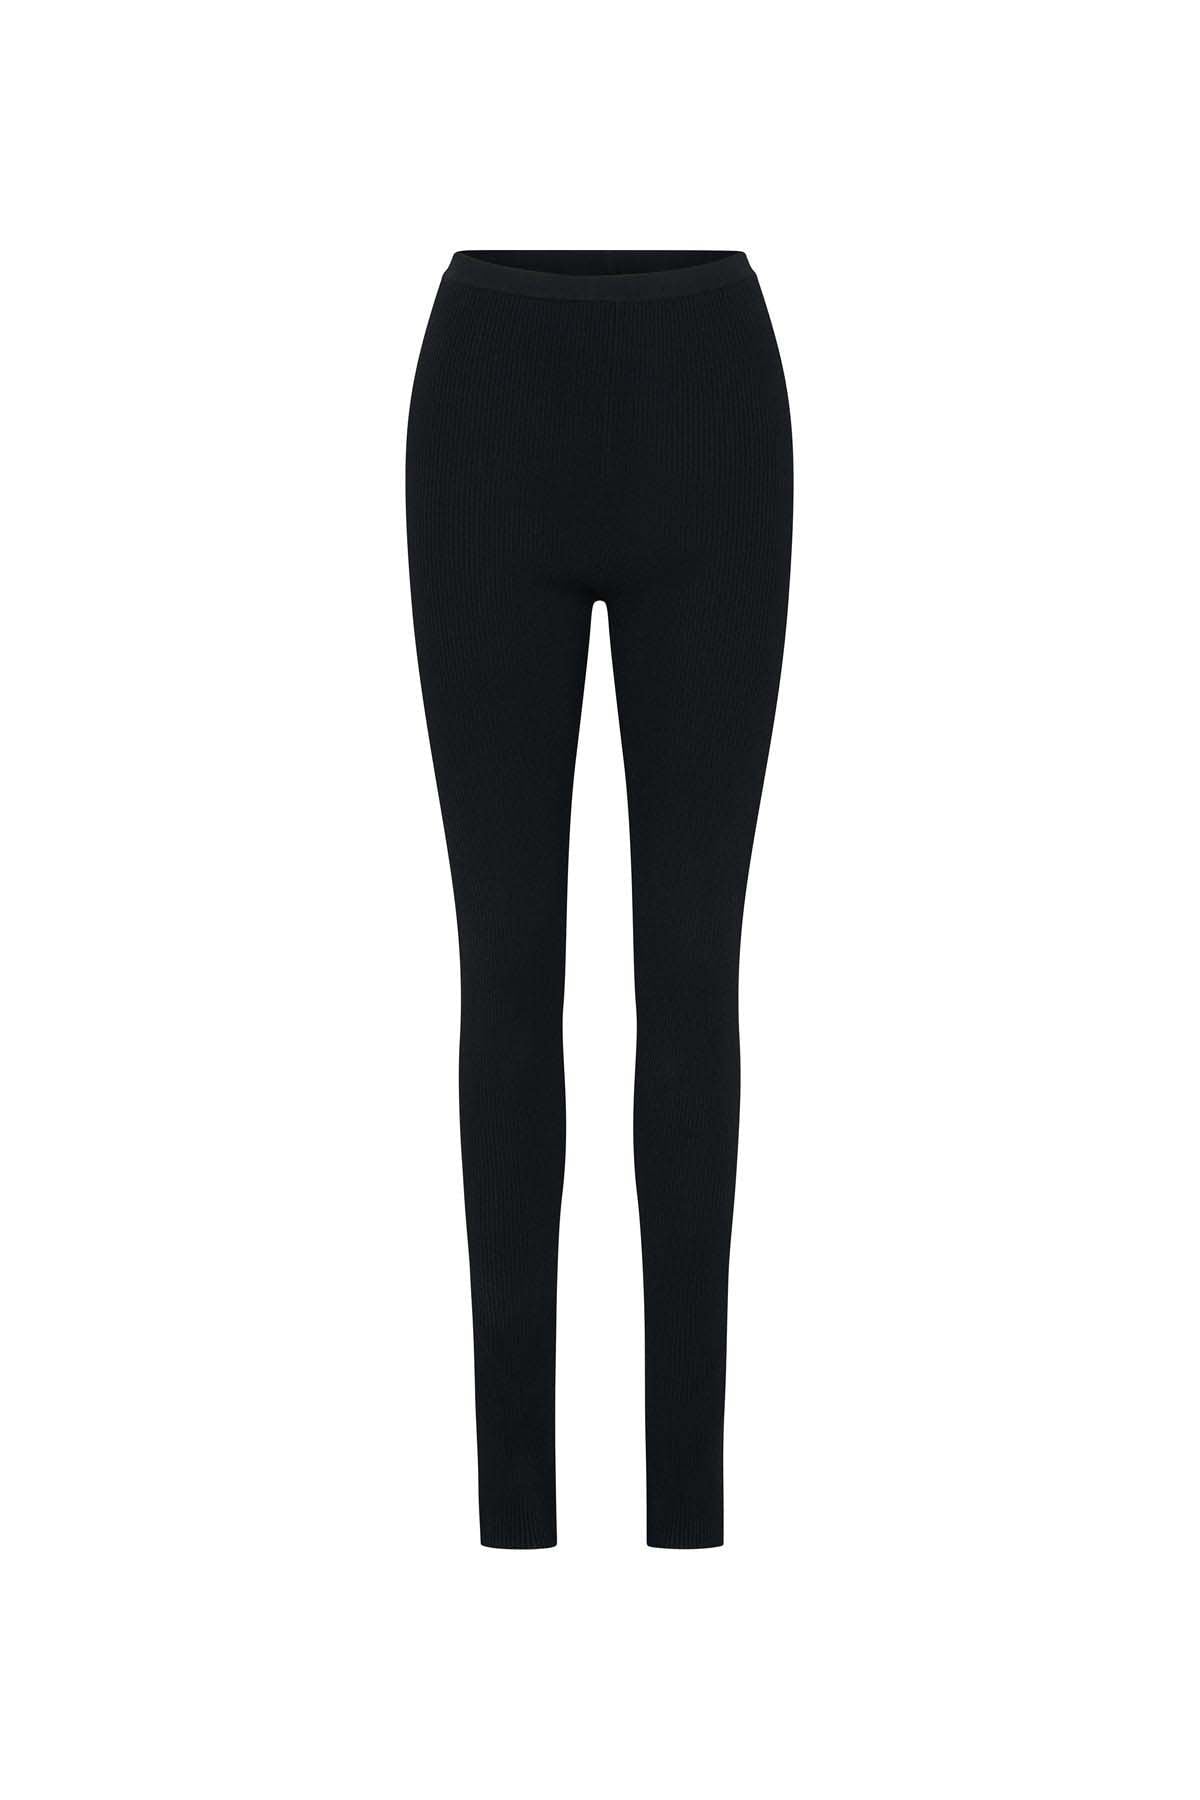 WILLOW KNIT LEGGING-BLACK Active Camilla and Marc XS Black 